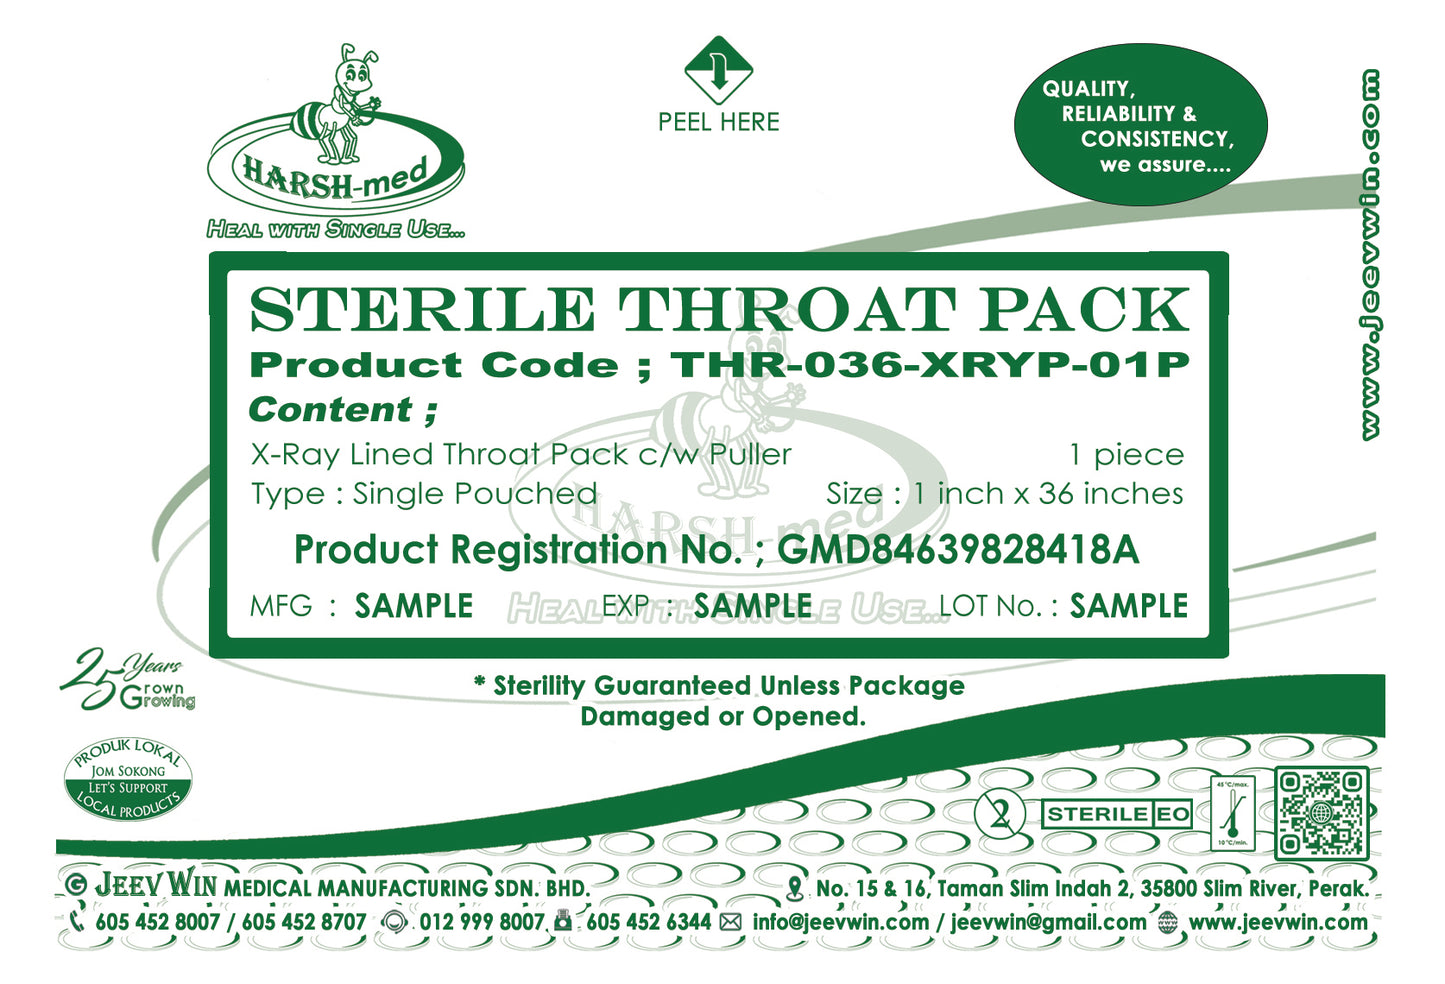 STERILE THROAT PACK - X-Ray Lined c/w Puller